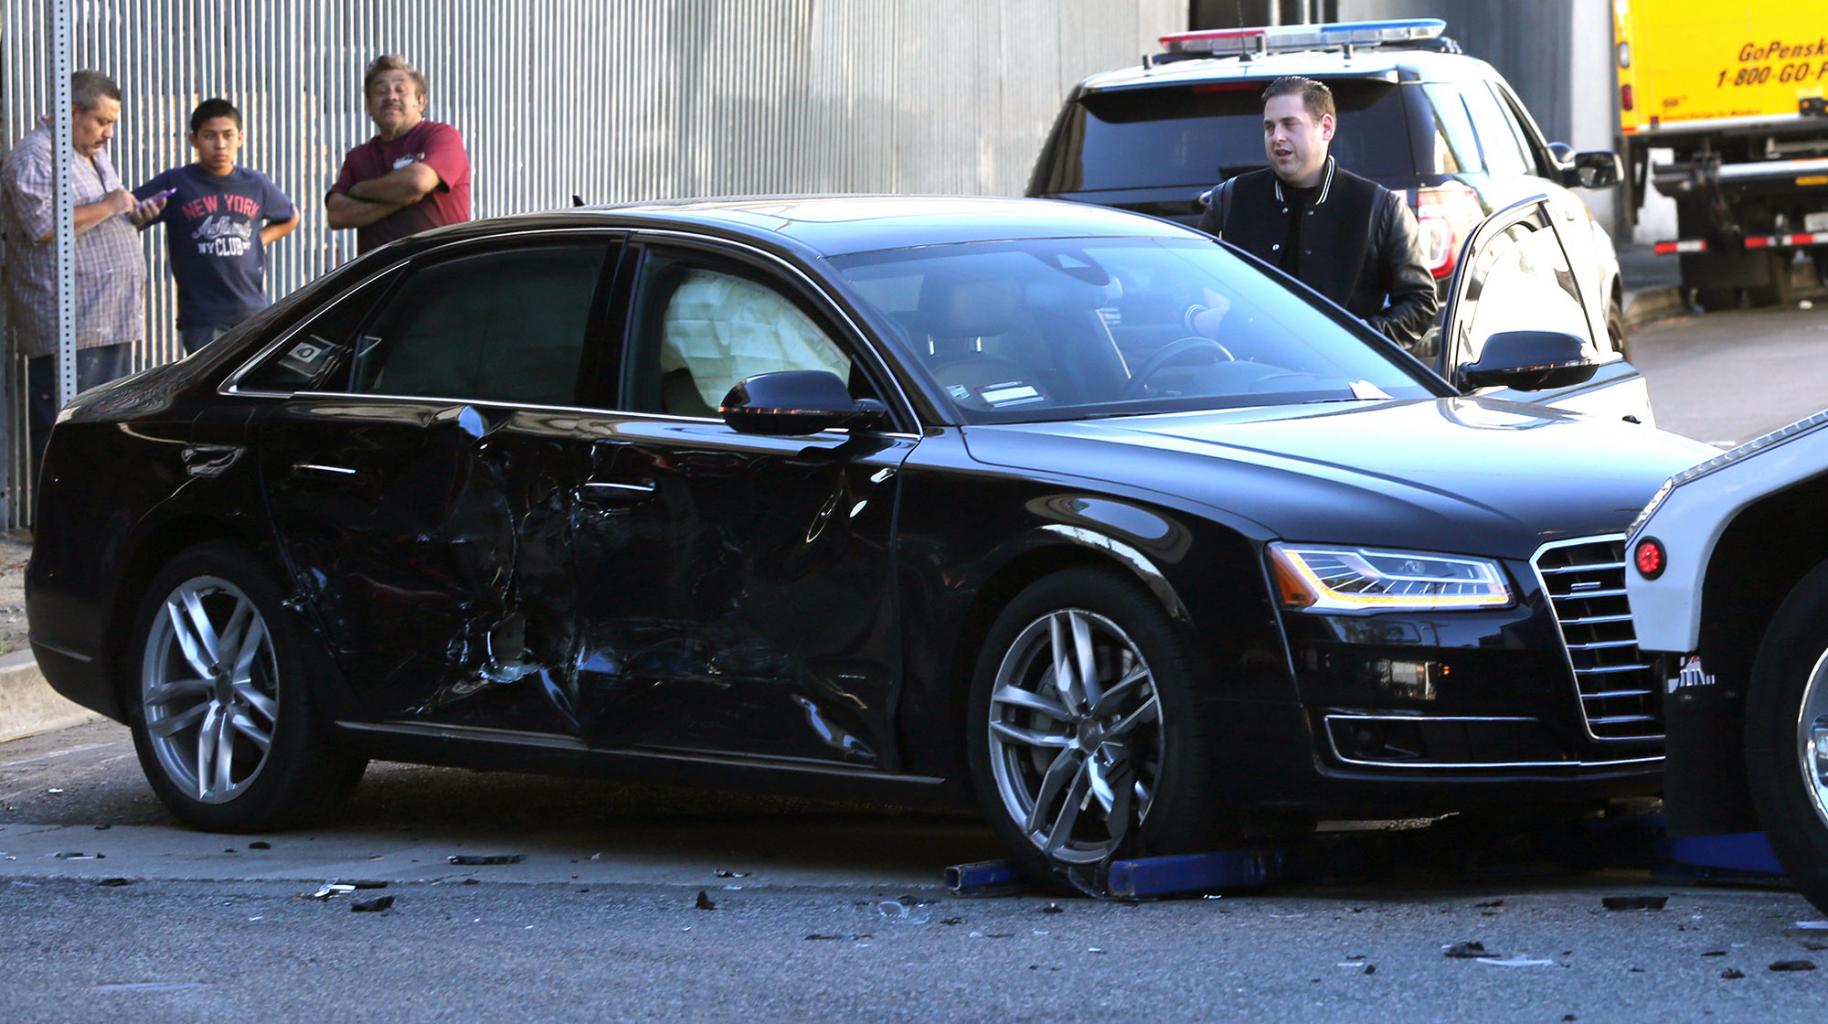 Jonah Hill Appeared        Shaken      '  After Car Crash in Downtown Los Angeles